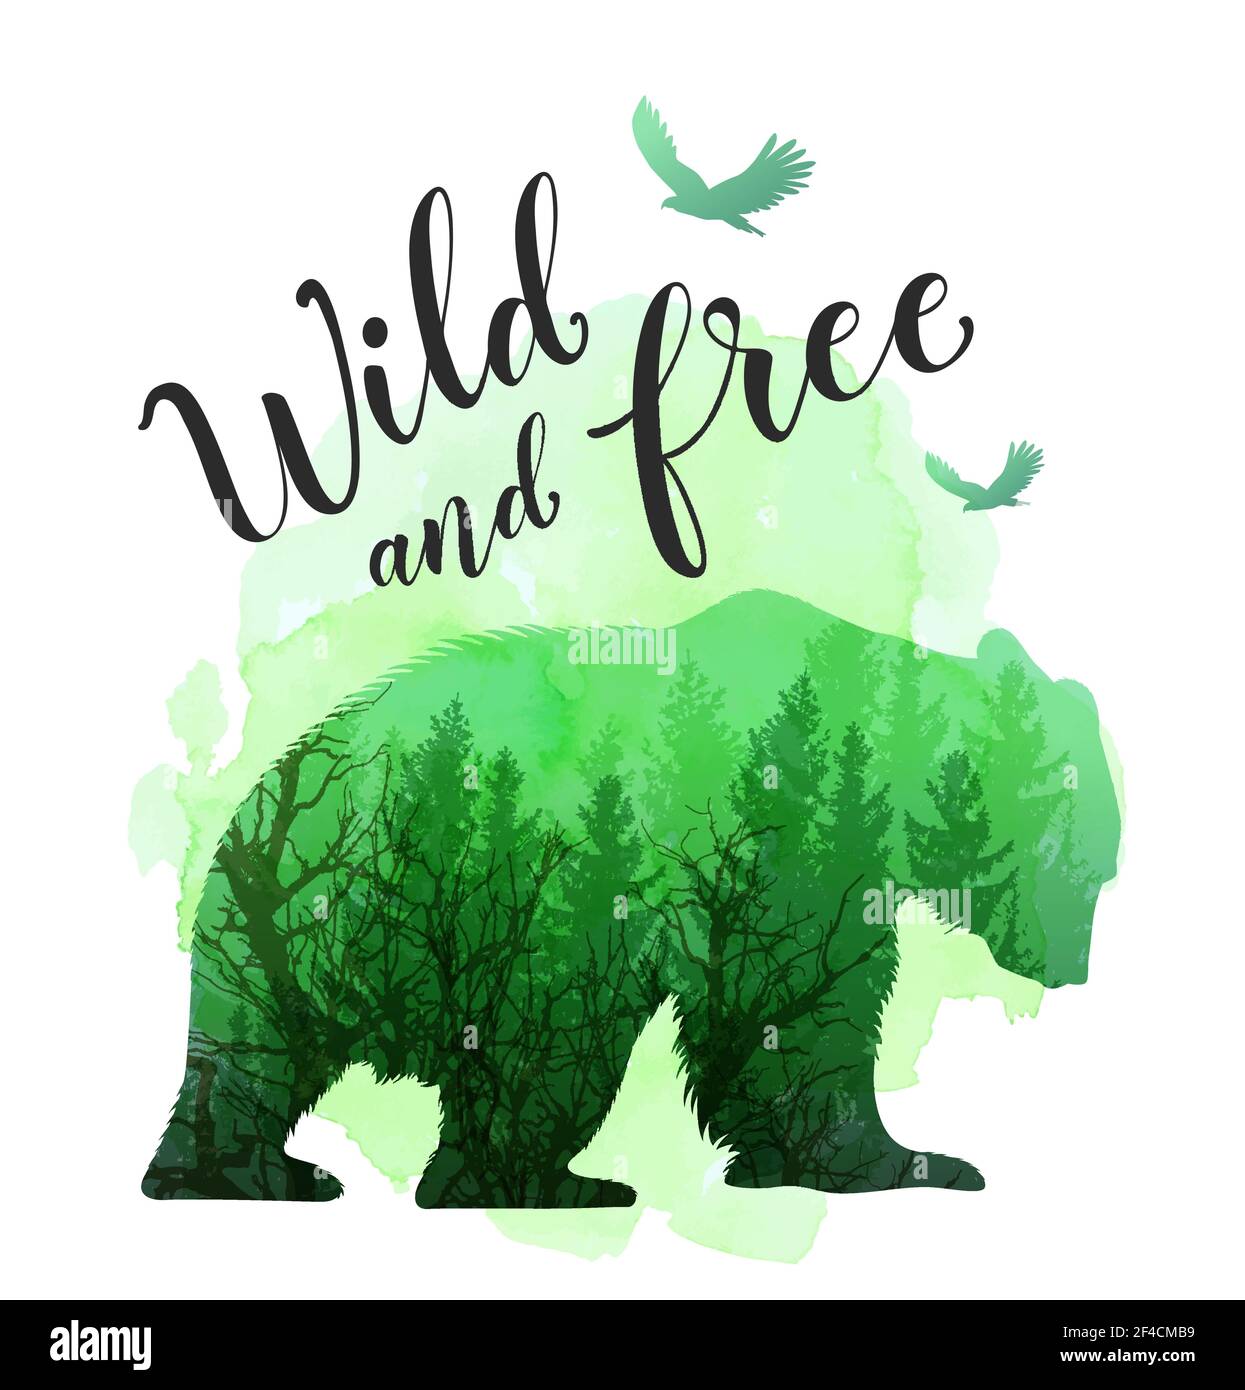 Green silhouette of a wild bear, tree and calligraphy. Wild life in nature. Vector illustration with green watercolor texture. Stock Vector